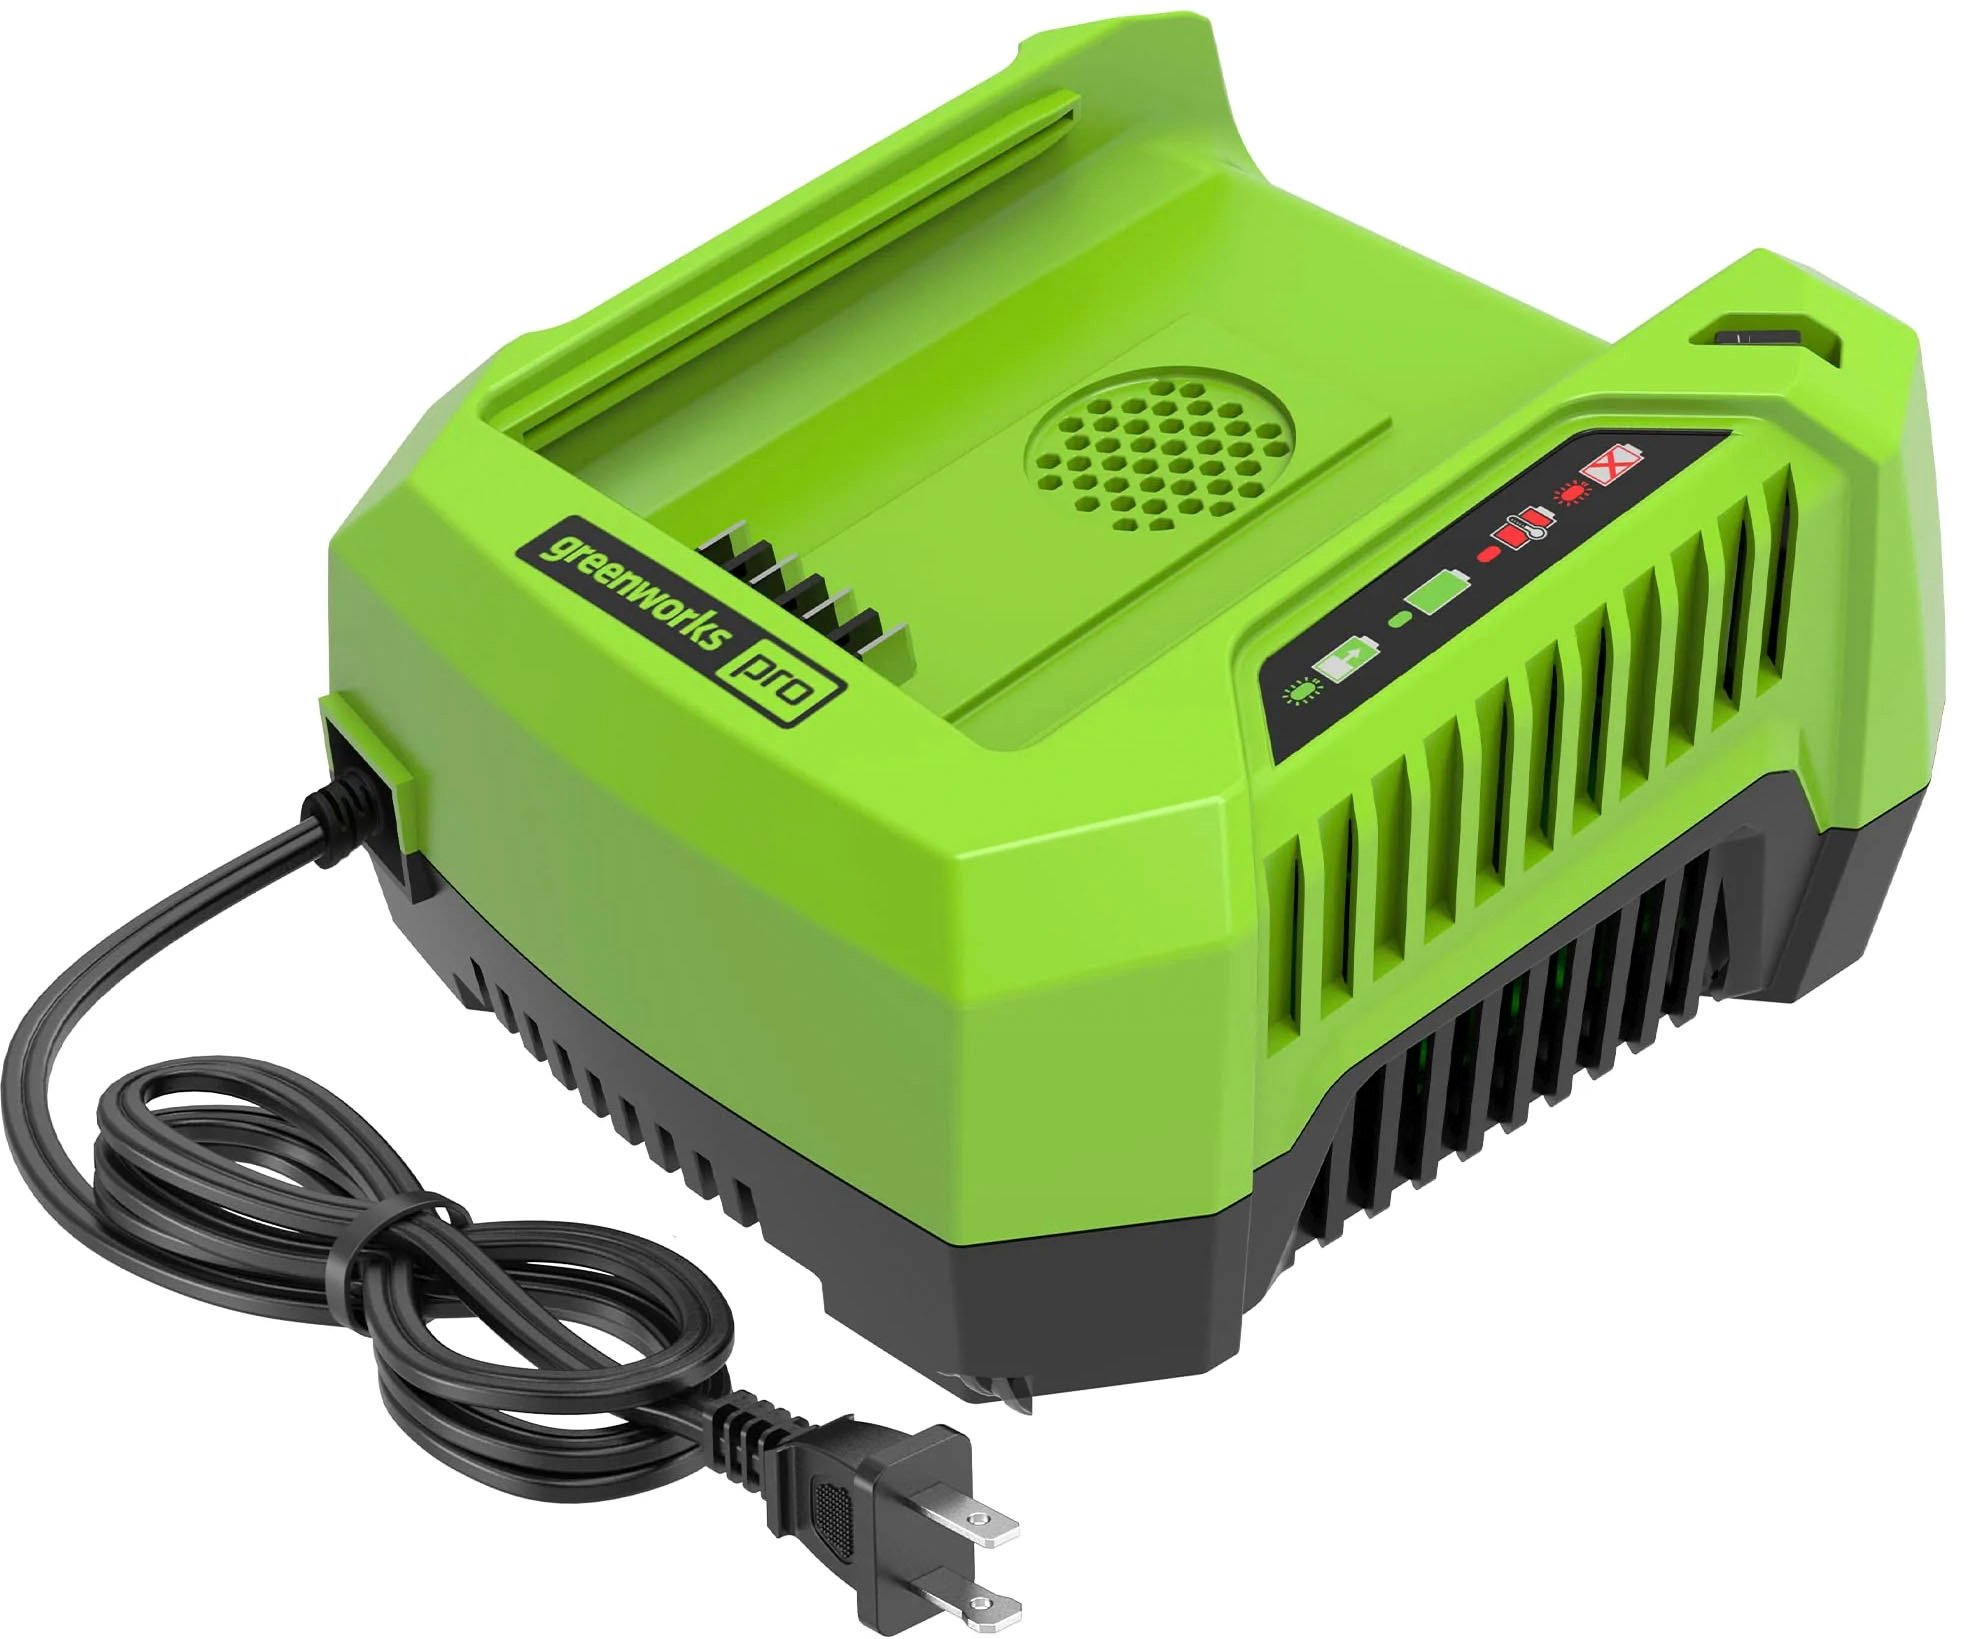 Greenworks Debuts Battery Powered & Robotic Lifestyle Solutions